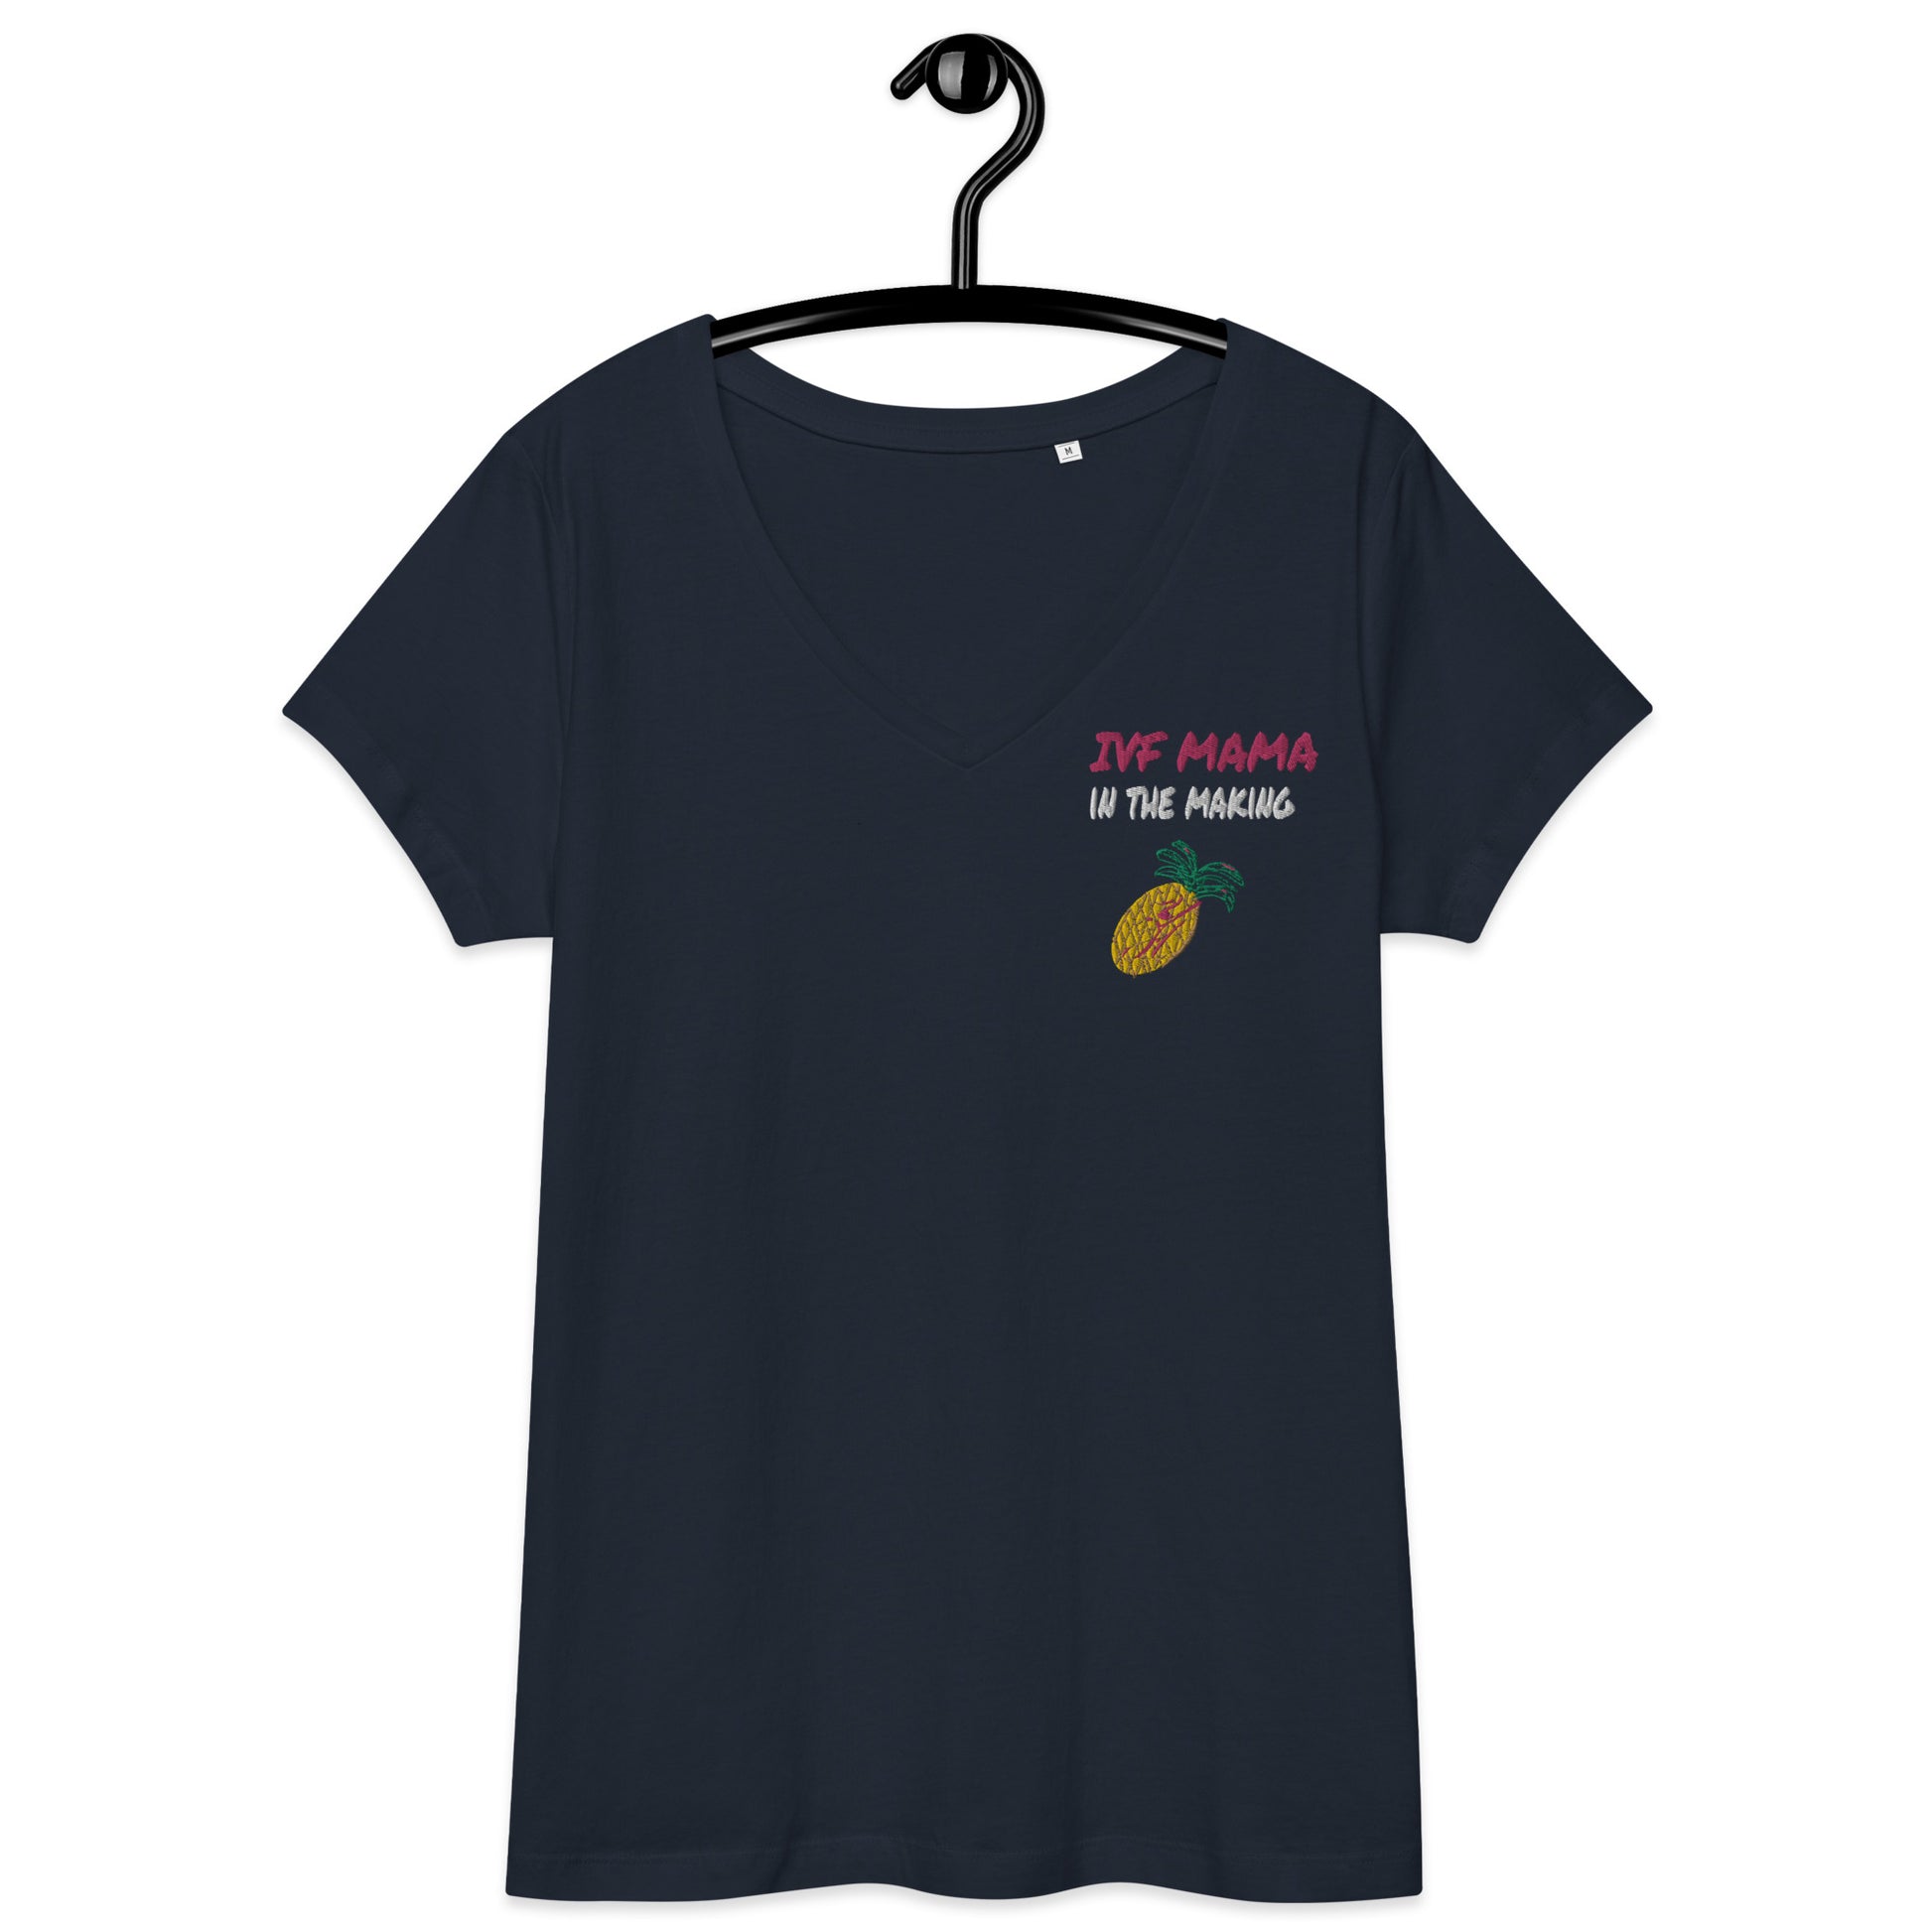 Ivf Mama in the making shirt fitted V-neck t-shirt - Young Hugs